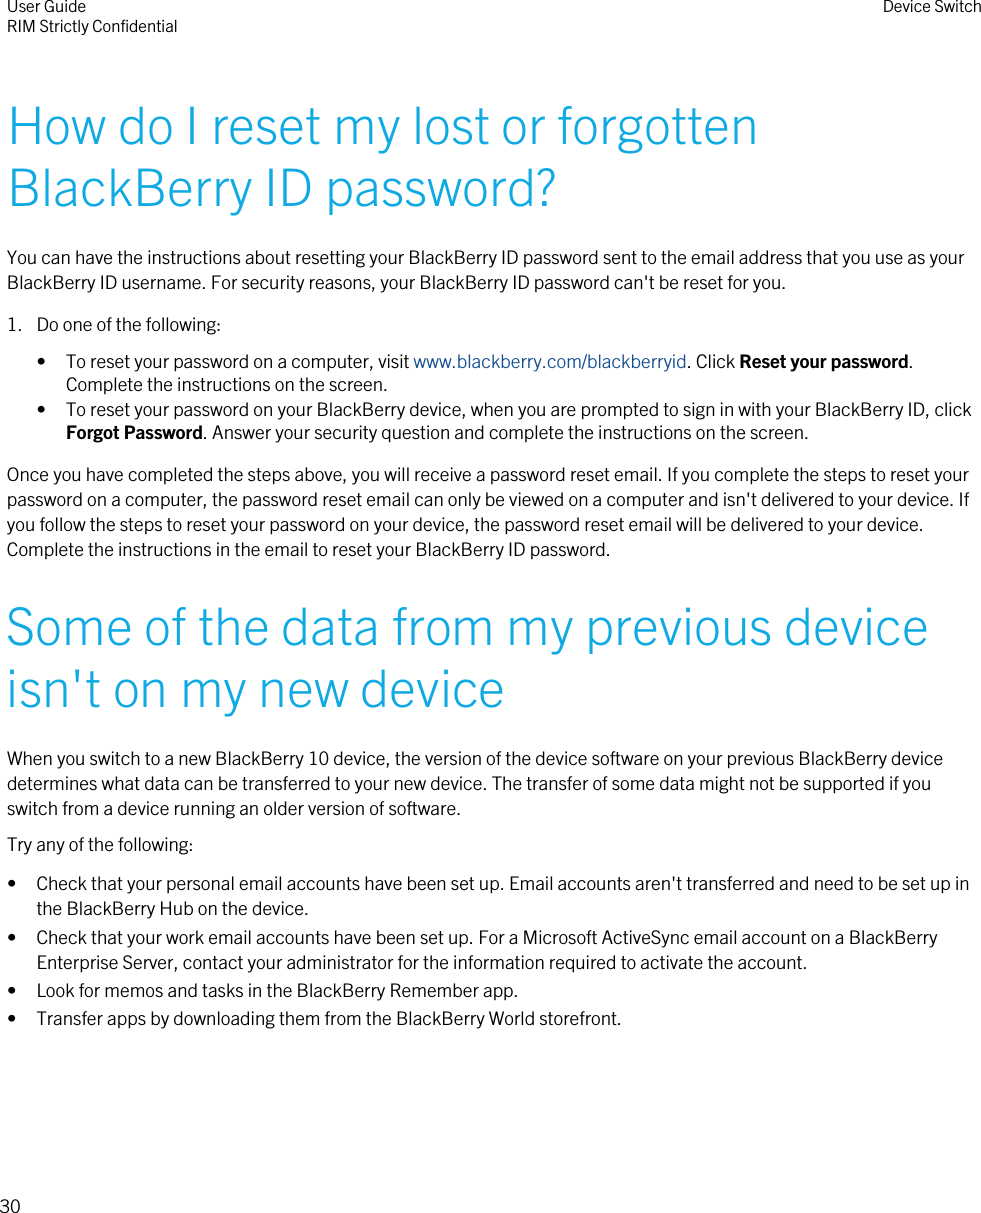 How do I reset my lost or forgottenBlackBerry ID password?You can have the instructions about resetting your BlackBerry ID password sent to the email address that you use as yourBlackBerry ID username. For security reasons, your BlackBerry ID password can&apos;t be reset for you.1. Do one of the following:• To reset your password on a computer, visit www.blackberry.com/blackberryid. Click Reset your password.Complete the instructions on the screen.• To reset your password on your BlackBerry device, when you are prompted to sign in with your BlackBerry ID, clickForgot Password. Answer your security question and complete the instructions on the screen.Once you have completed the steps above, you will receive a password reset email. If you complete the steps to reset yourpassword on a computer, the password reset email can only be viewed on a computer and isn&apos;t delivered to your device. Ifyou follow the steps to reset your password on your device, the password reset email will be delivered to your device.Complete the instructions in the email to reset your BlackBerry ID password.Some of the data from my previous deviceisn&apos;t on my new deviceWhen you switch to a new BlackBerry 10 device, the version of the device software on your previous BlackBerry devicedetermines what data can be transferred to your new device. The transfer of some data might not be supported if youswitch from a device running an older version of software.Try any of the following:• Check that your personal email accounts have been set up. Email accounts aren&apos;t transferred and need to be set up inthe BlackBerry Hub on the device.• Check that your work email accounts have been set up. For a Microsoft ActiveSync email account on a BlackBerryEnterprise Server, contact your administrator for the information required to activate the account.• Look for memos and tasks in the BlackBerry Remember app.• Transfer apps by downloading them from the BlackBerry World storefront.User GuideRIM Strictly Confidential Device Switch30